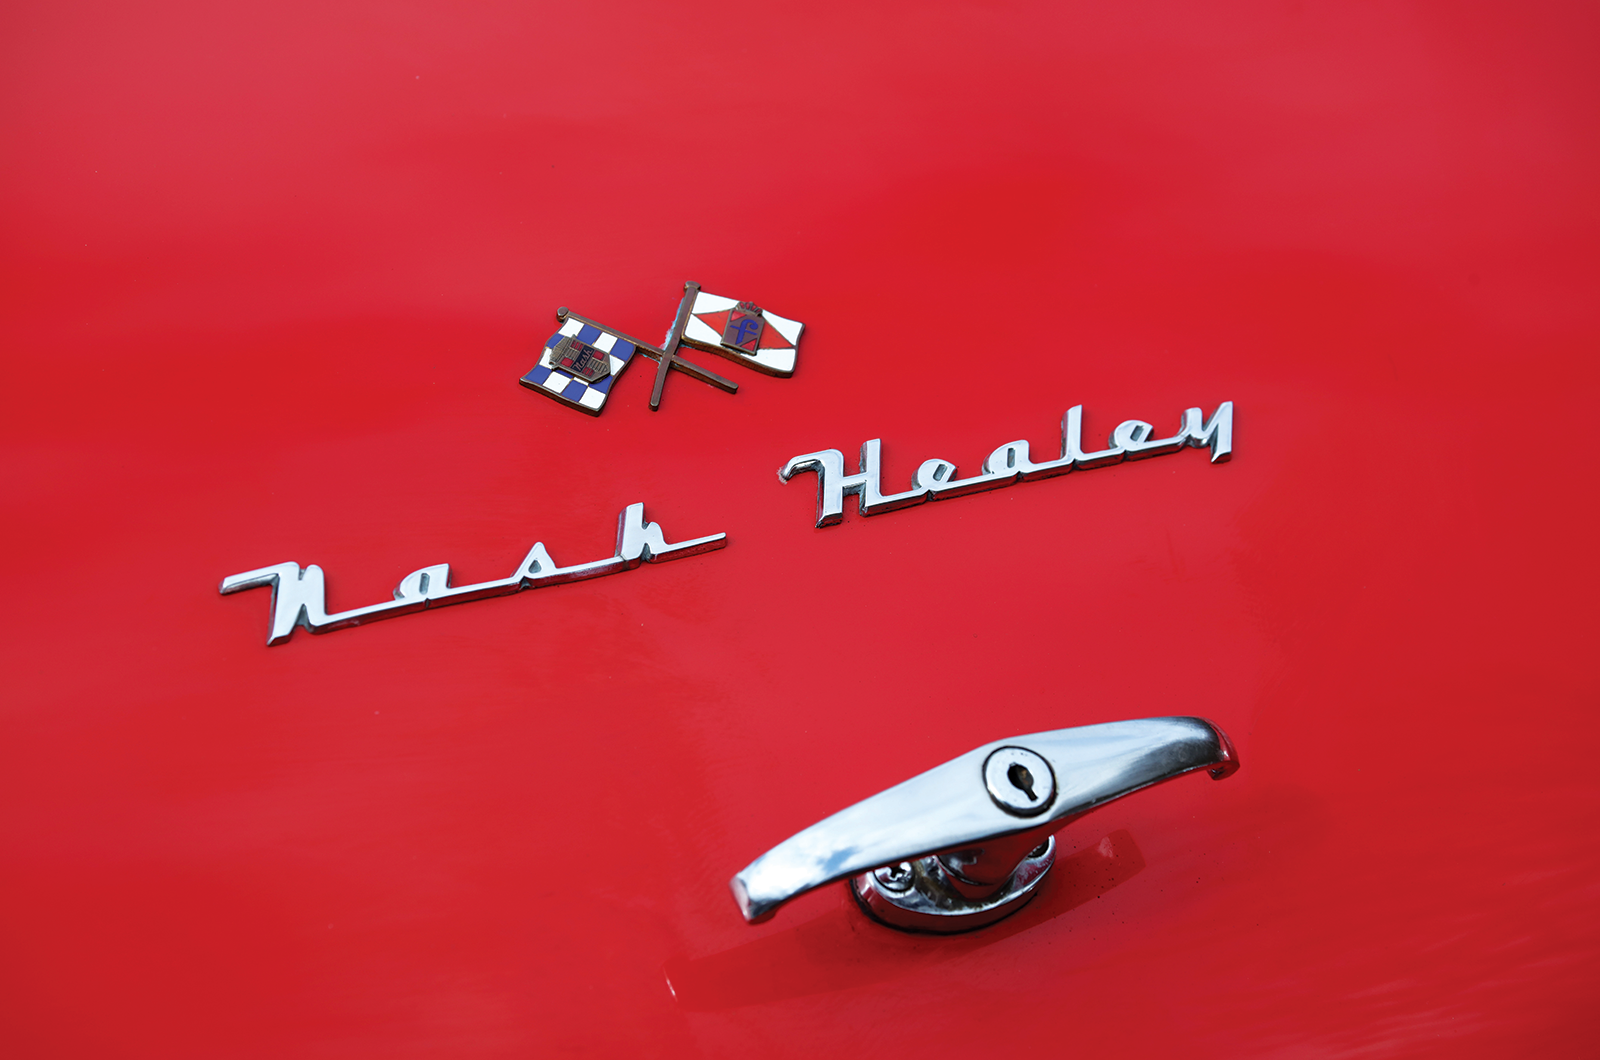 Nash-Healey: Italian style, American muscle and British brains